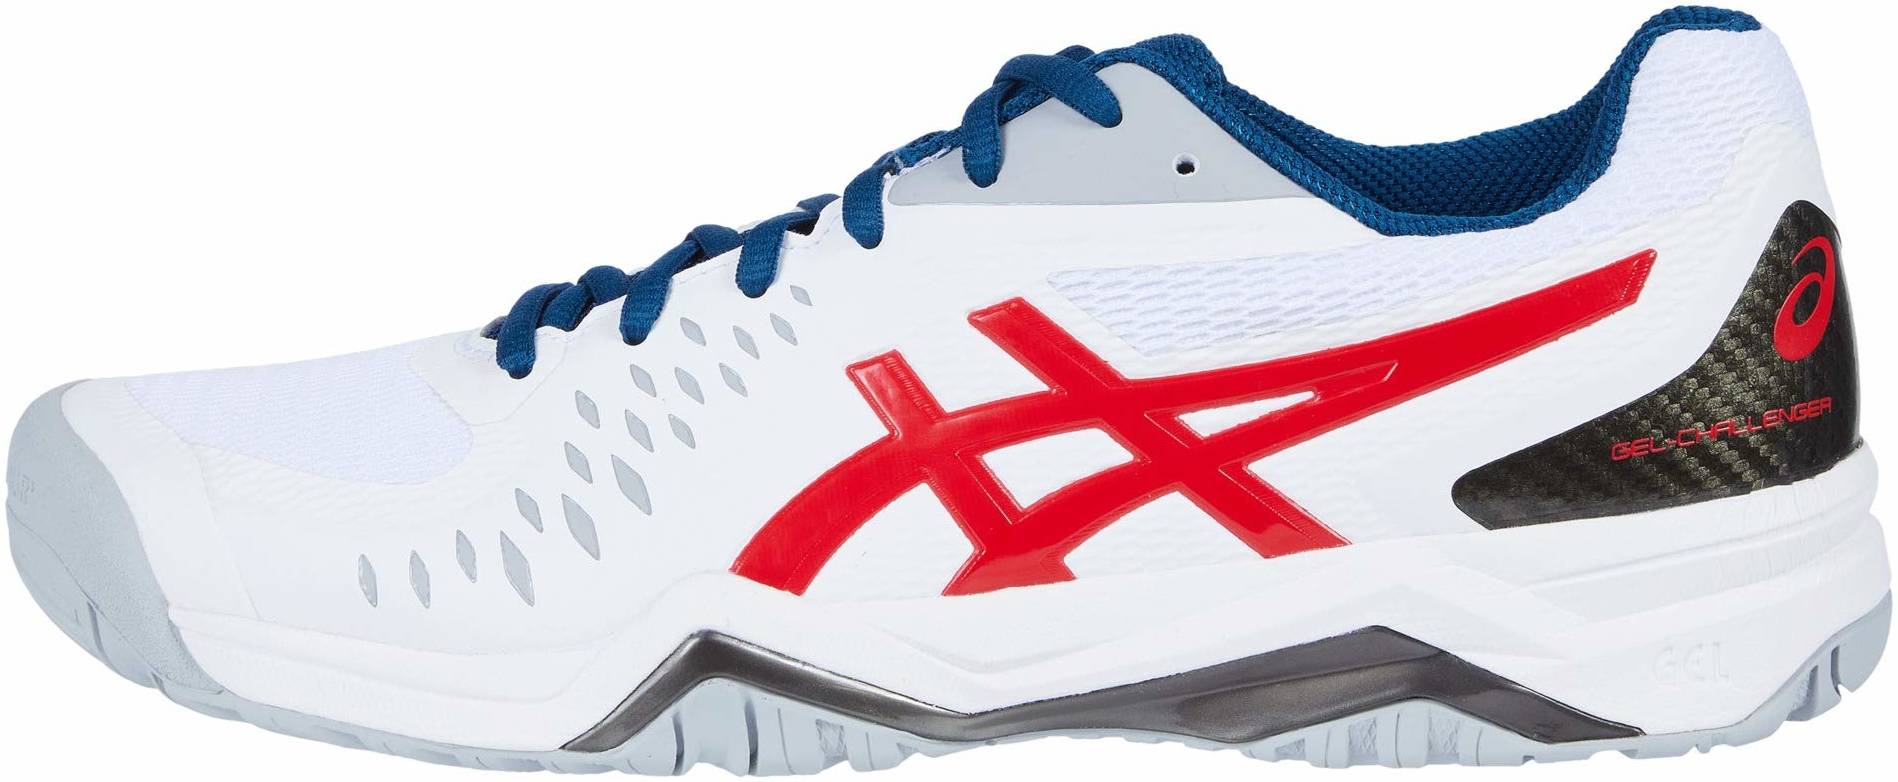 asics challenger 12 review